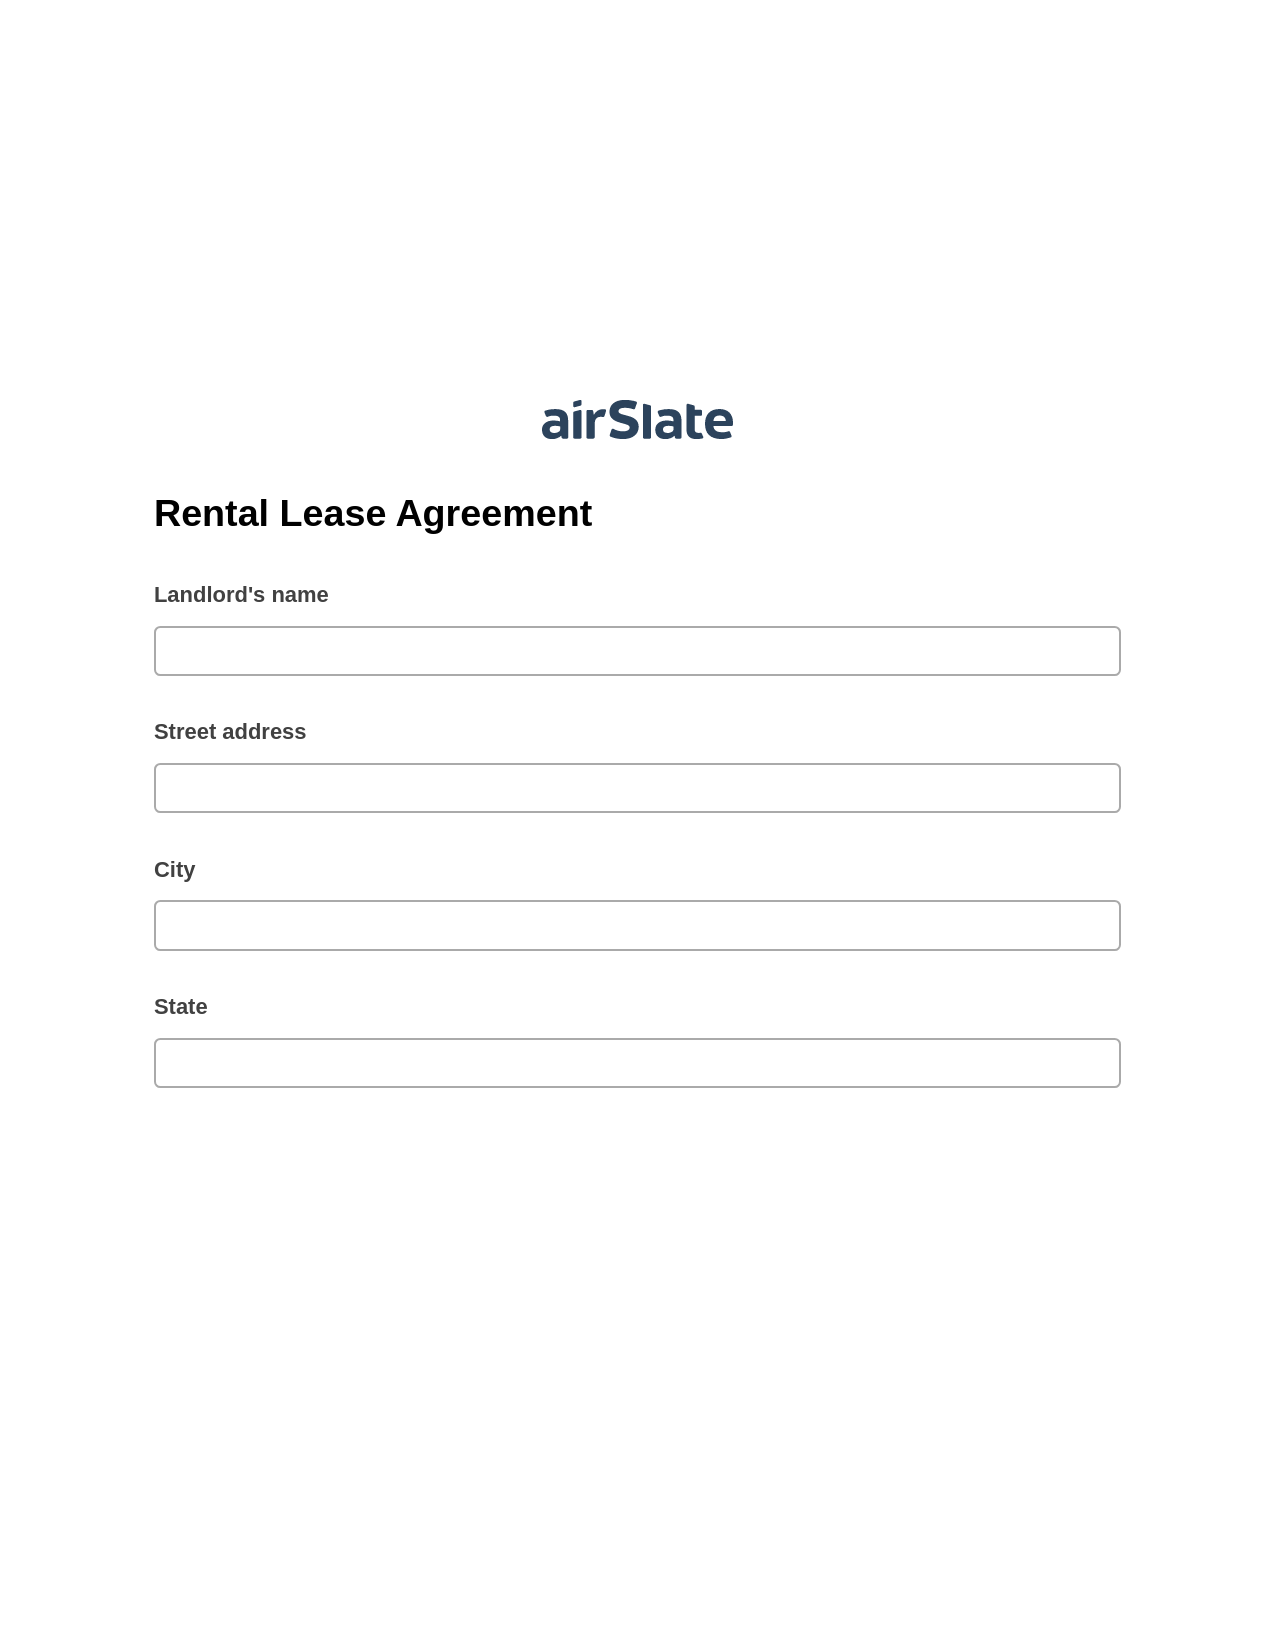 Rental Lease Agreement Pre-fill from CSV File Bot, Create Slate from another Flow Bot, Export to Google Sheet Bot